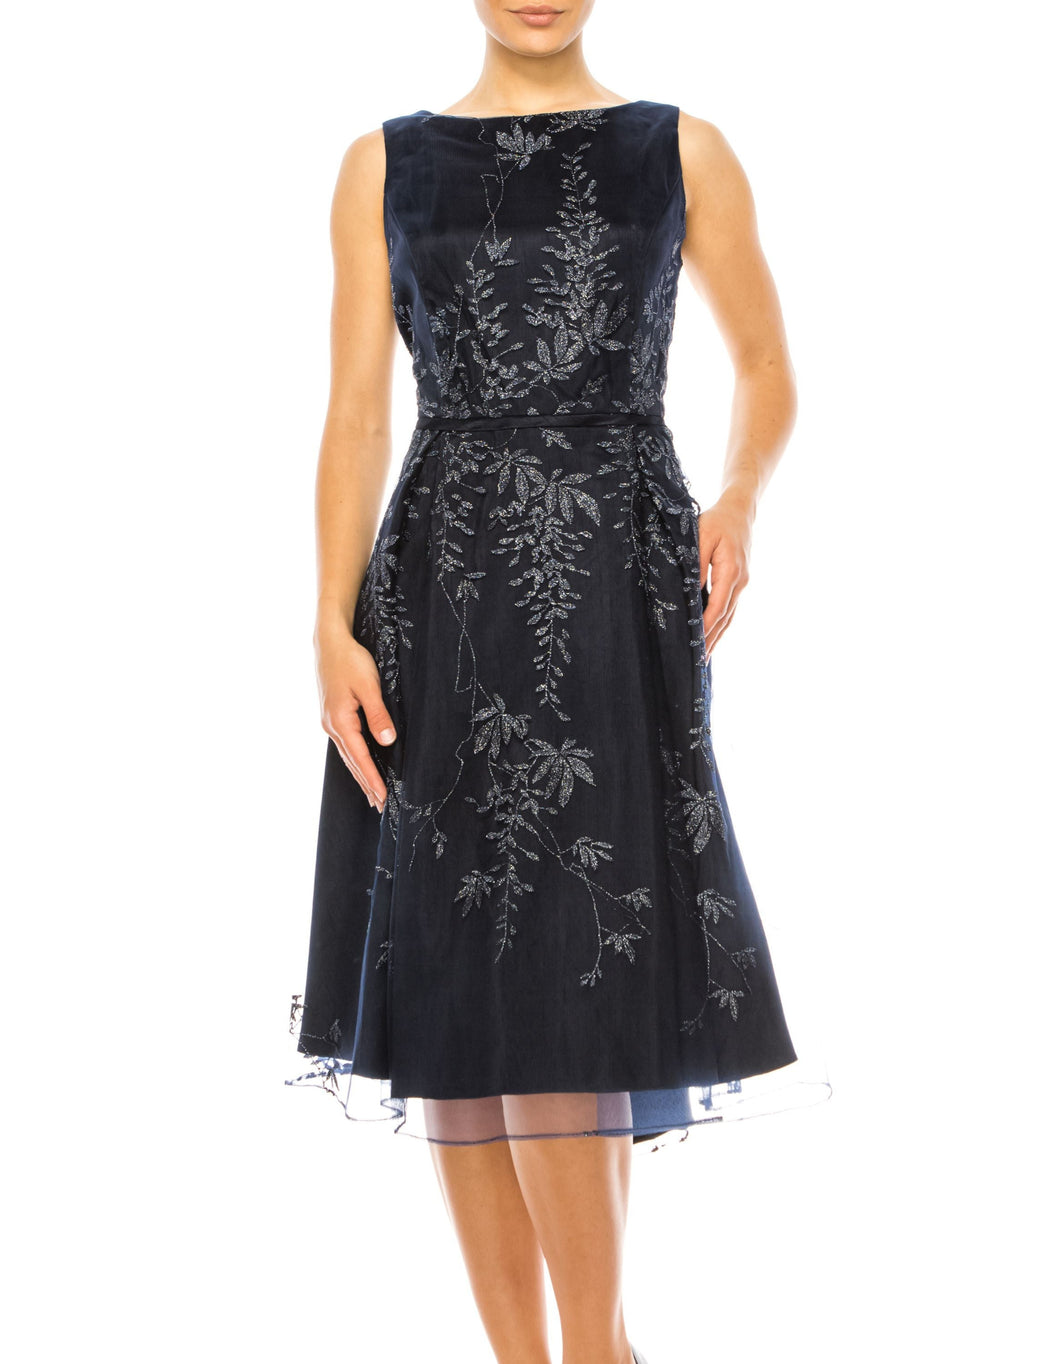 Maison Tara Navy Multi-Use, Metallic Embroidered Day Dress Size XS(4) Only! Party Cocktail